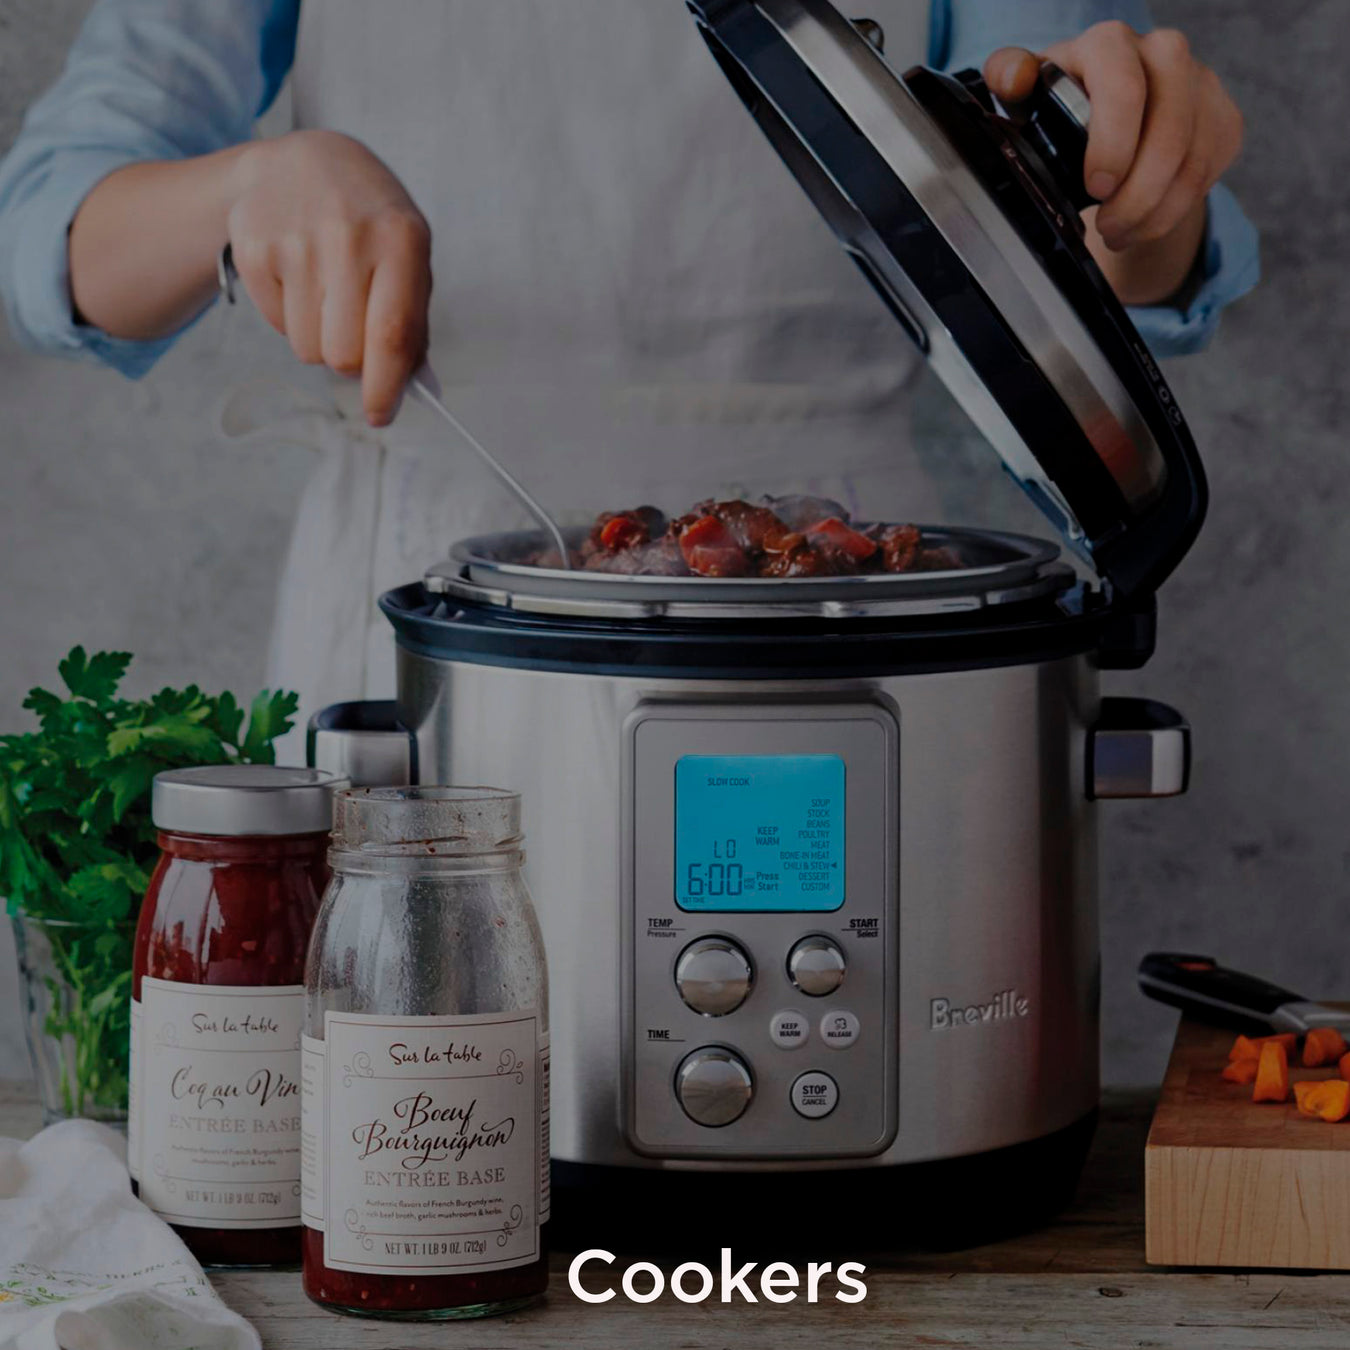 Breville Cookers